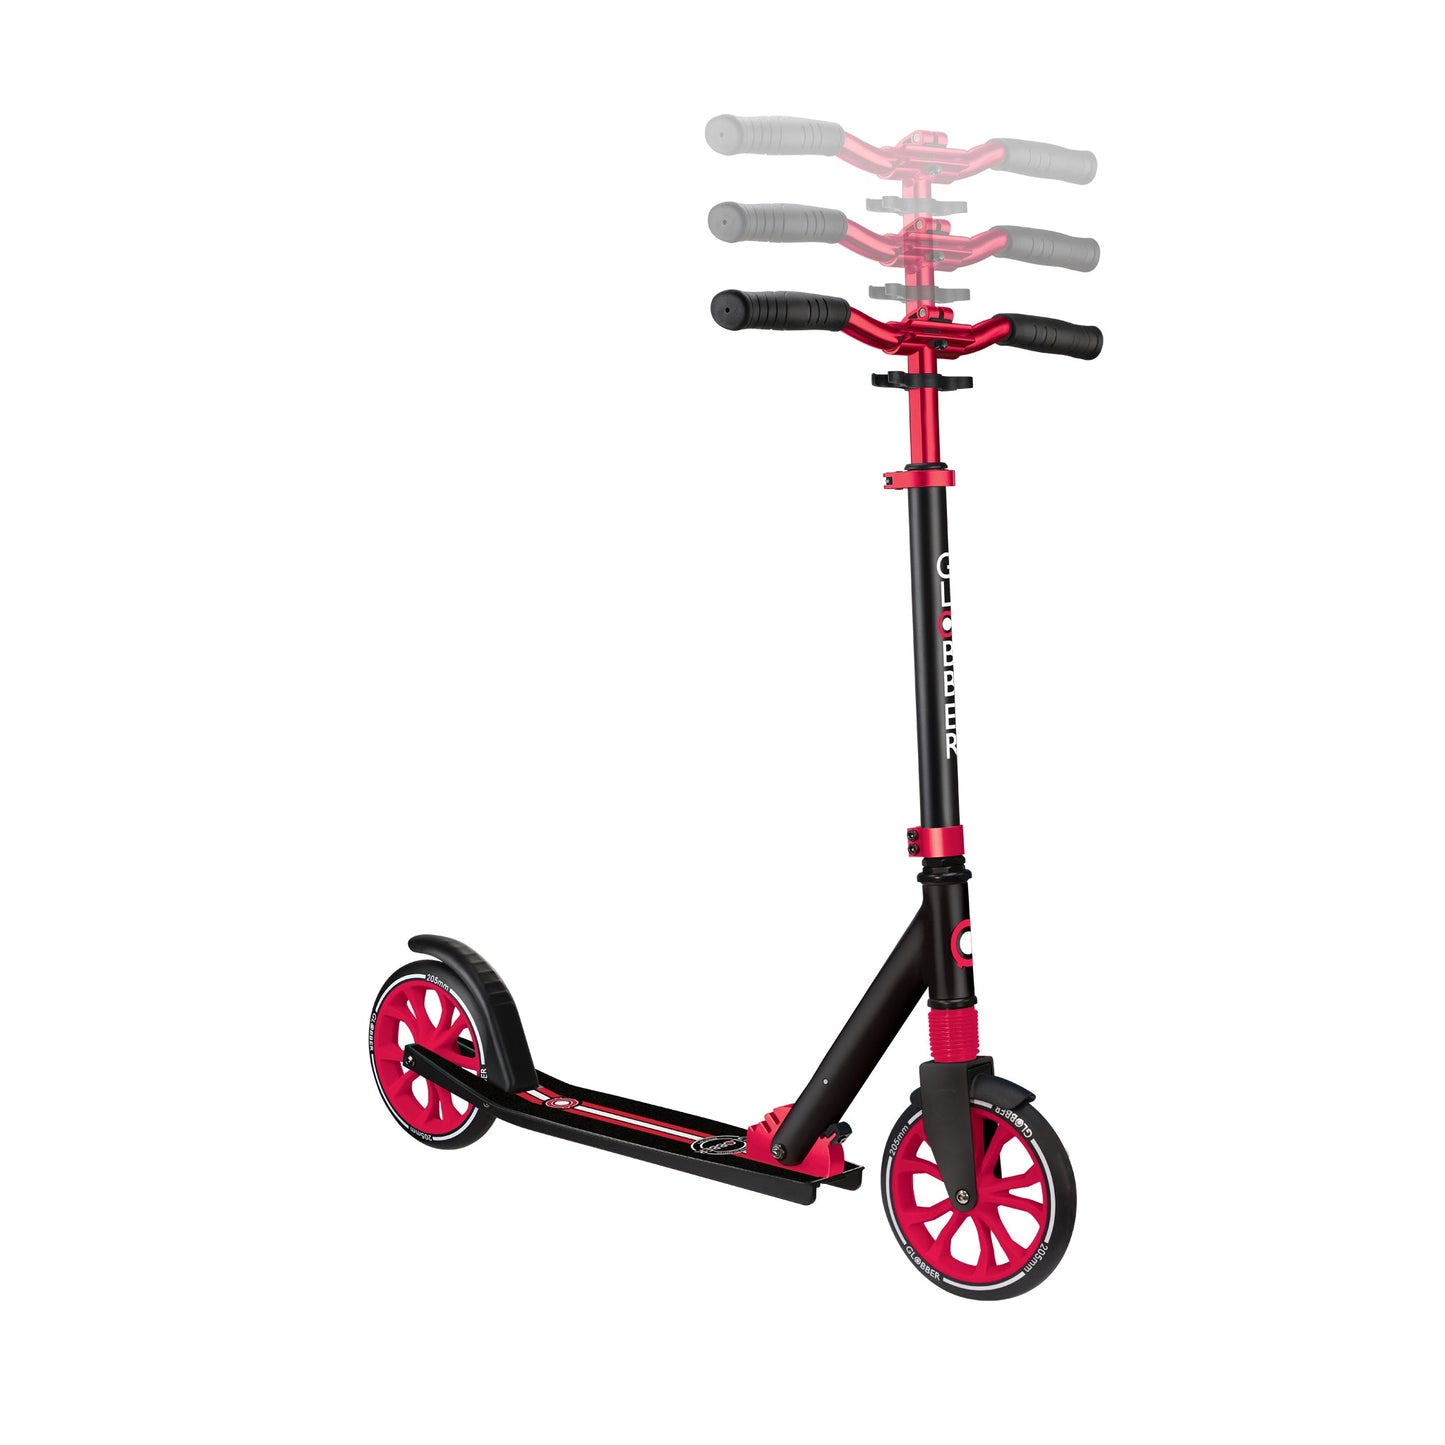 NL 205: Big Wheel Scooter for Kids and Teens - Red/Black